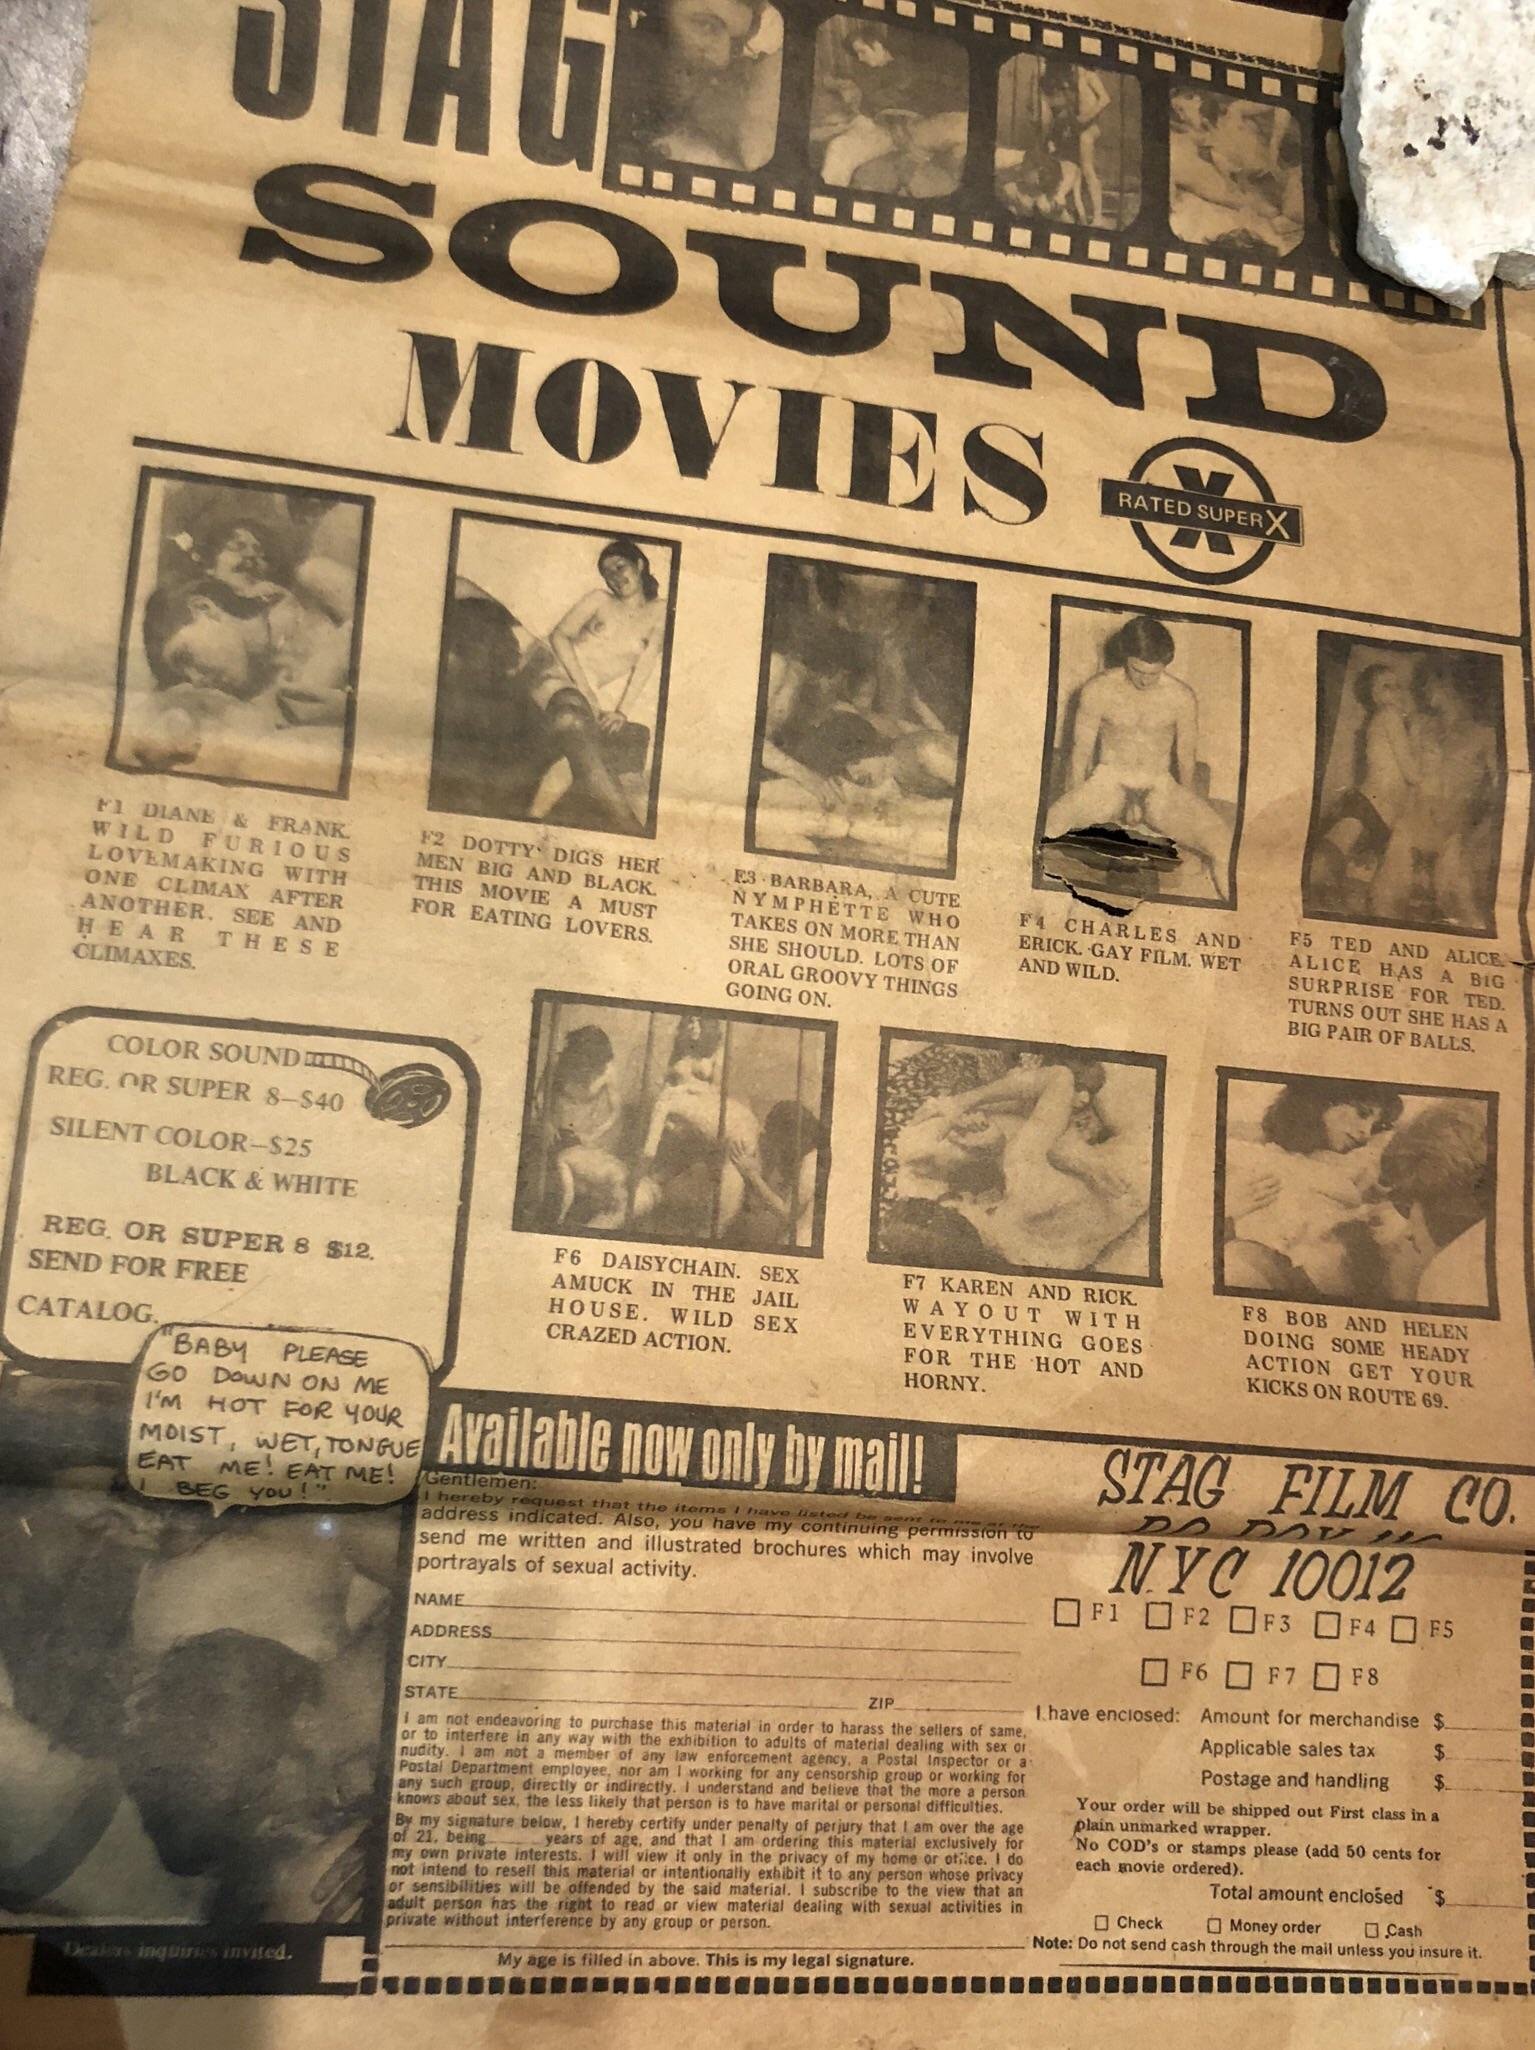 “See and hear these climaxes.” Found this old stag sound movies ad in the attic of the home I just bought.